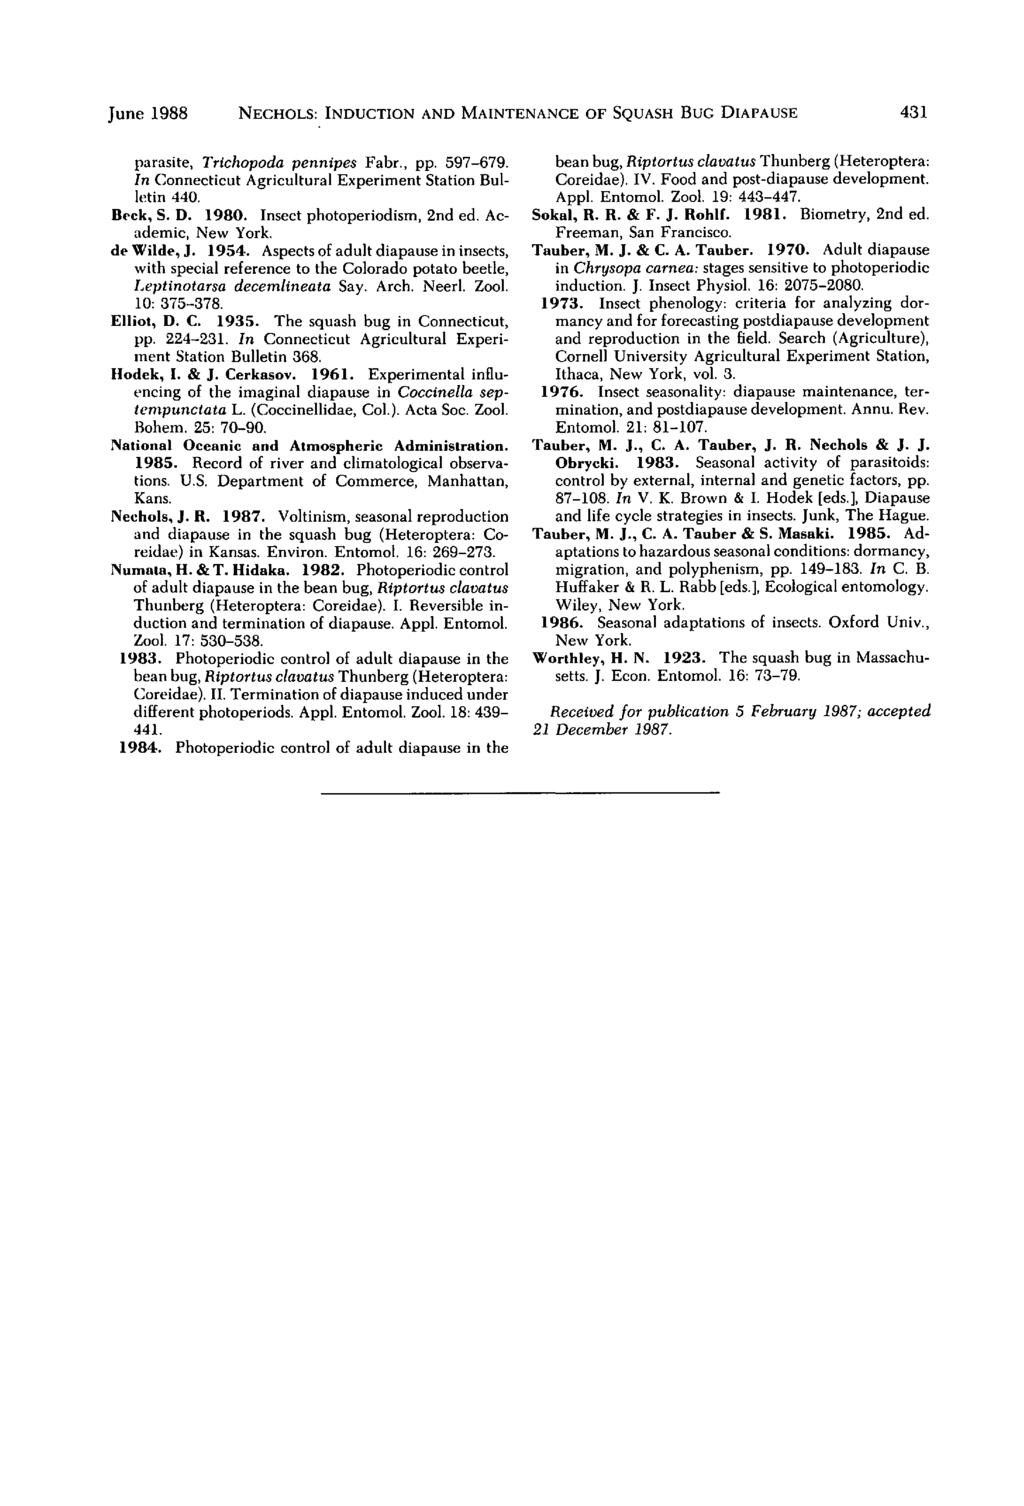 June 1988 NECHOLS: INDUCTION AND MAINTENANCE OF SQUASH BUG DIAPAUSE 431 parasite, Trichopoda pennipes Fabr., pp. 597-679. In Connecticut Agricultural Experiment Station Bulletin 440. Bl'ck, S. D. 1980.